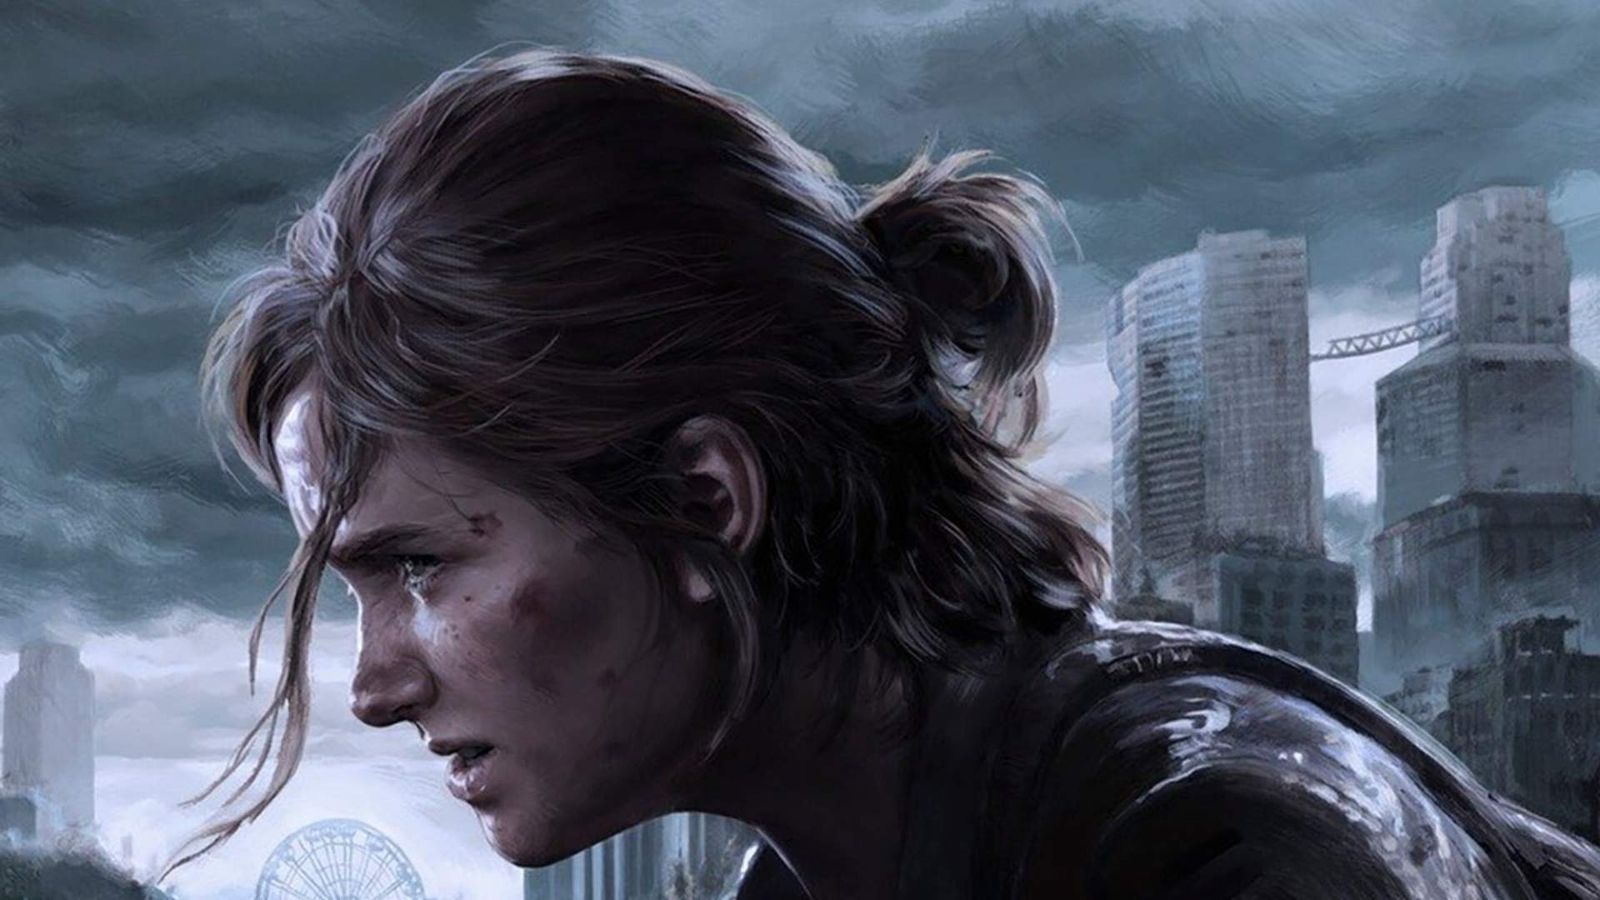 Ellie is standing in front of a city with a ferris wheel in The Last of Us Part 2